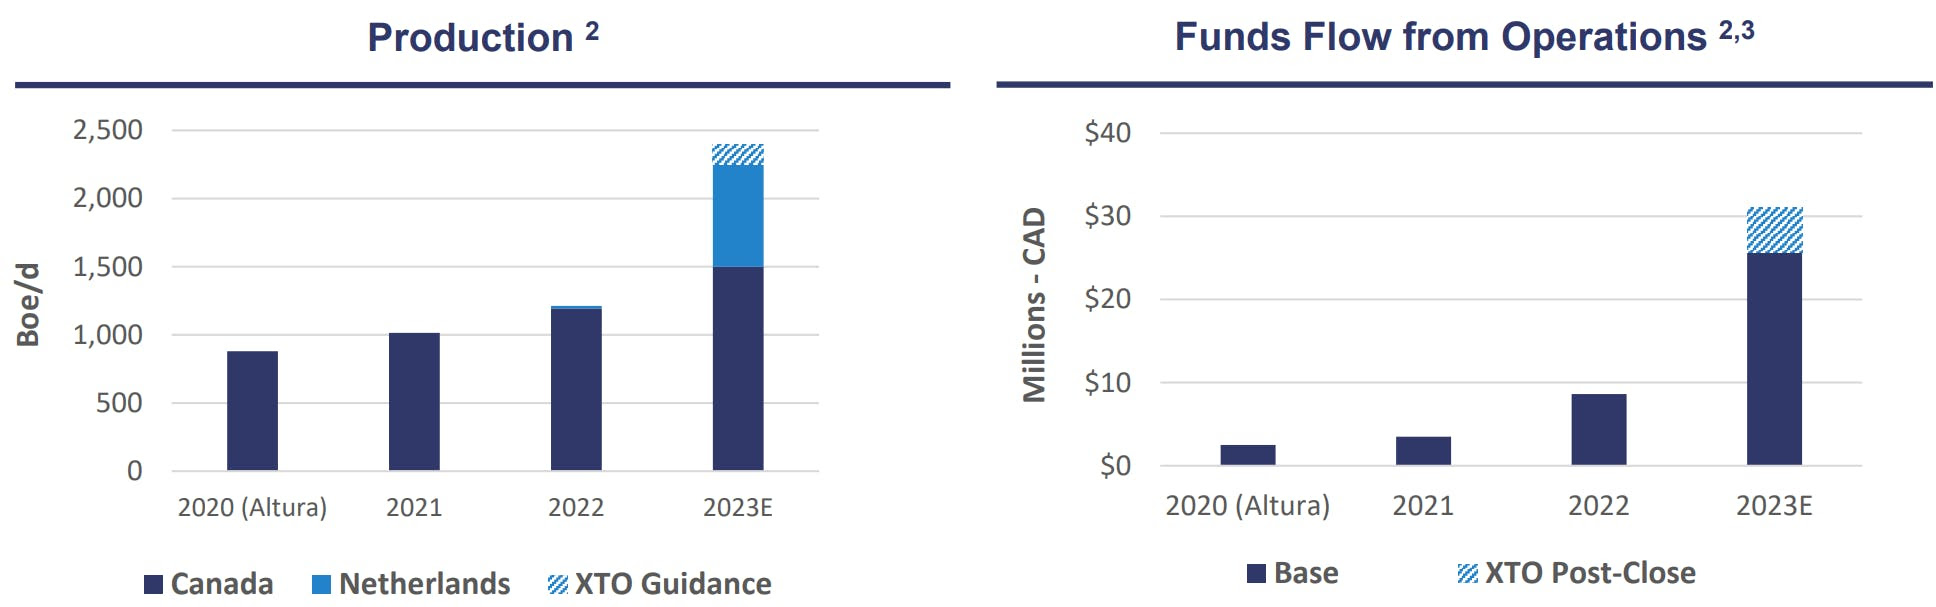 Production and Funds Flow from Operations | Tenaz Energy Q1 2023